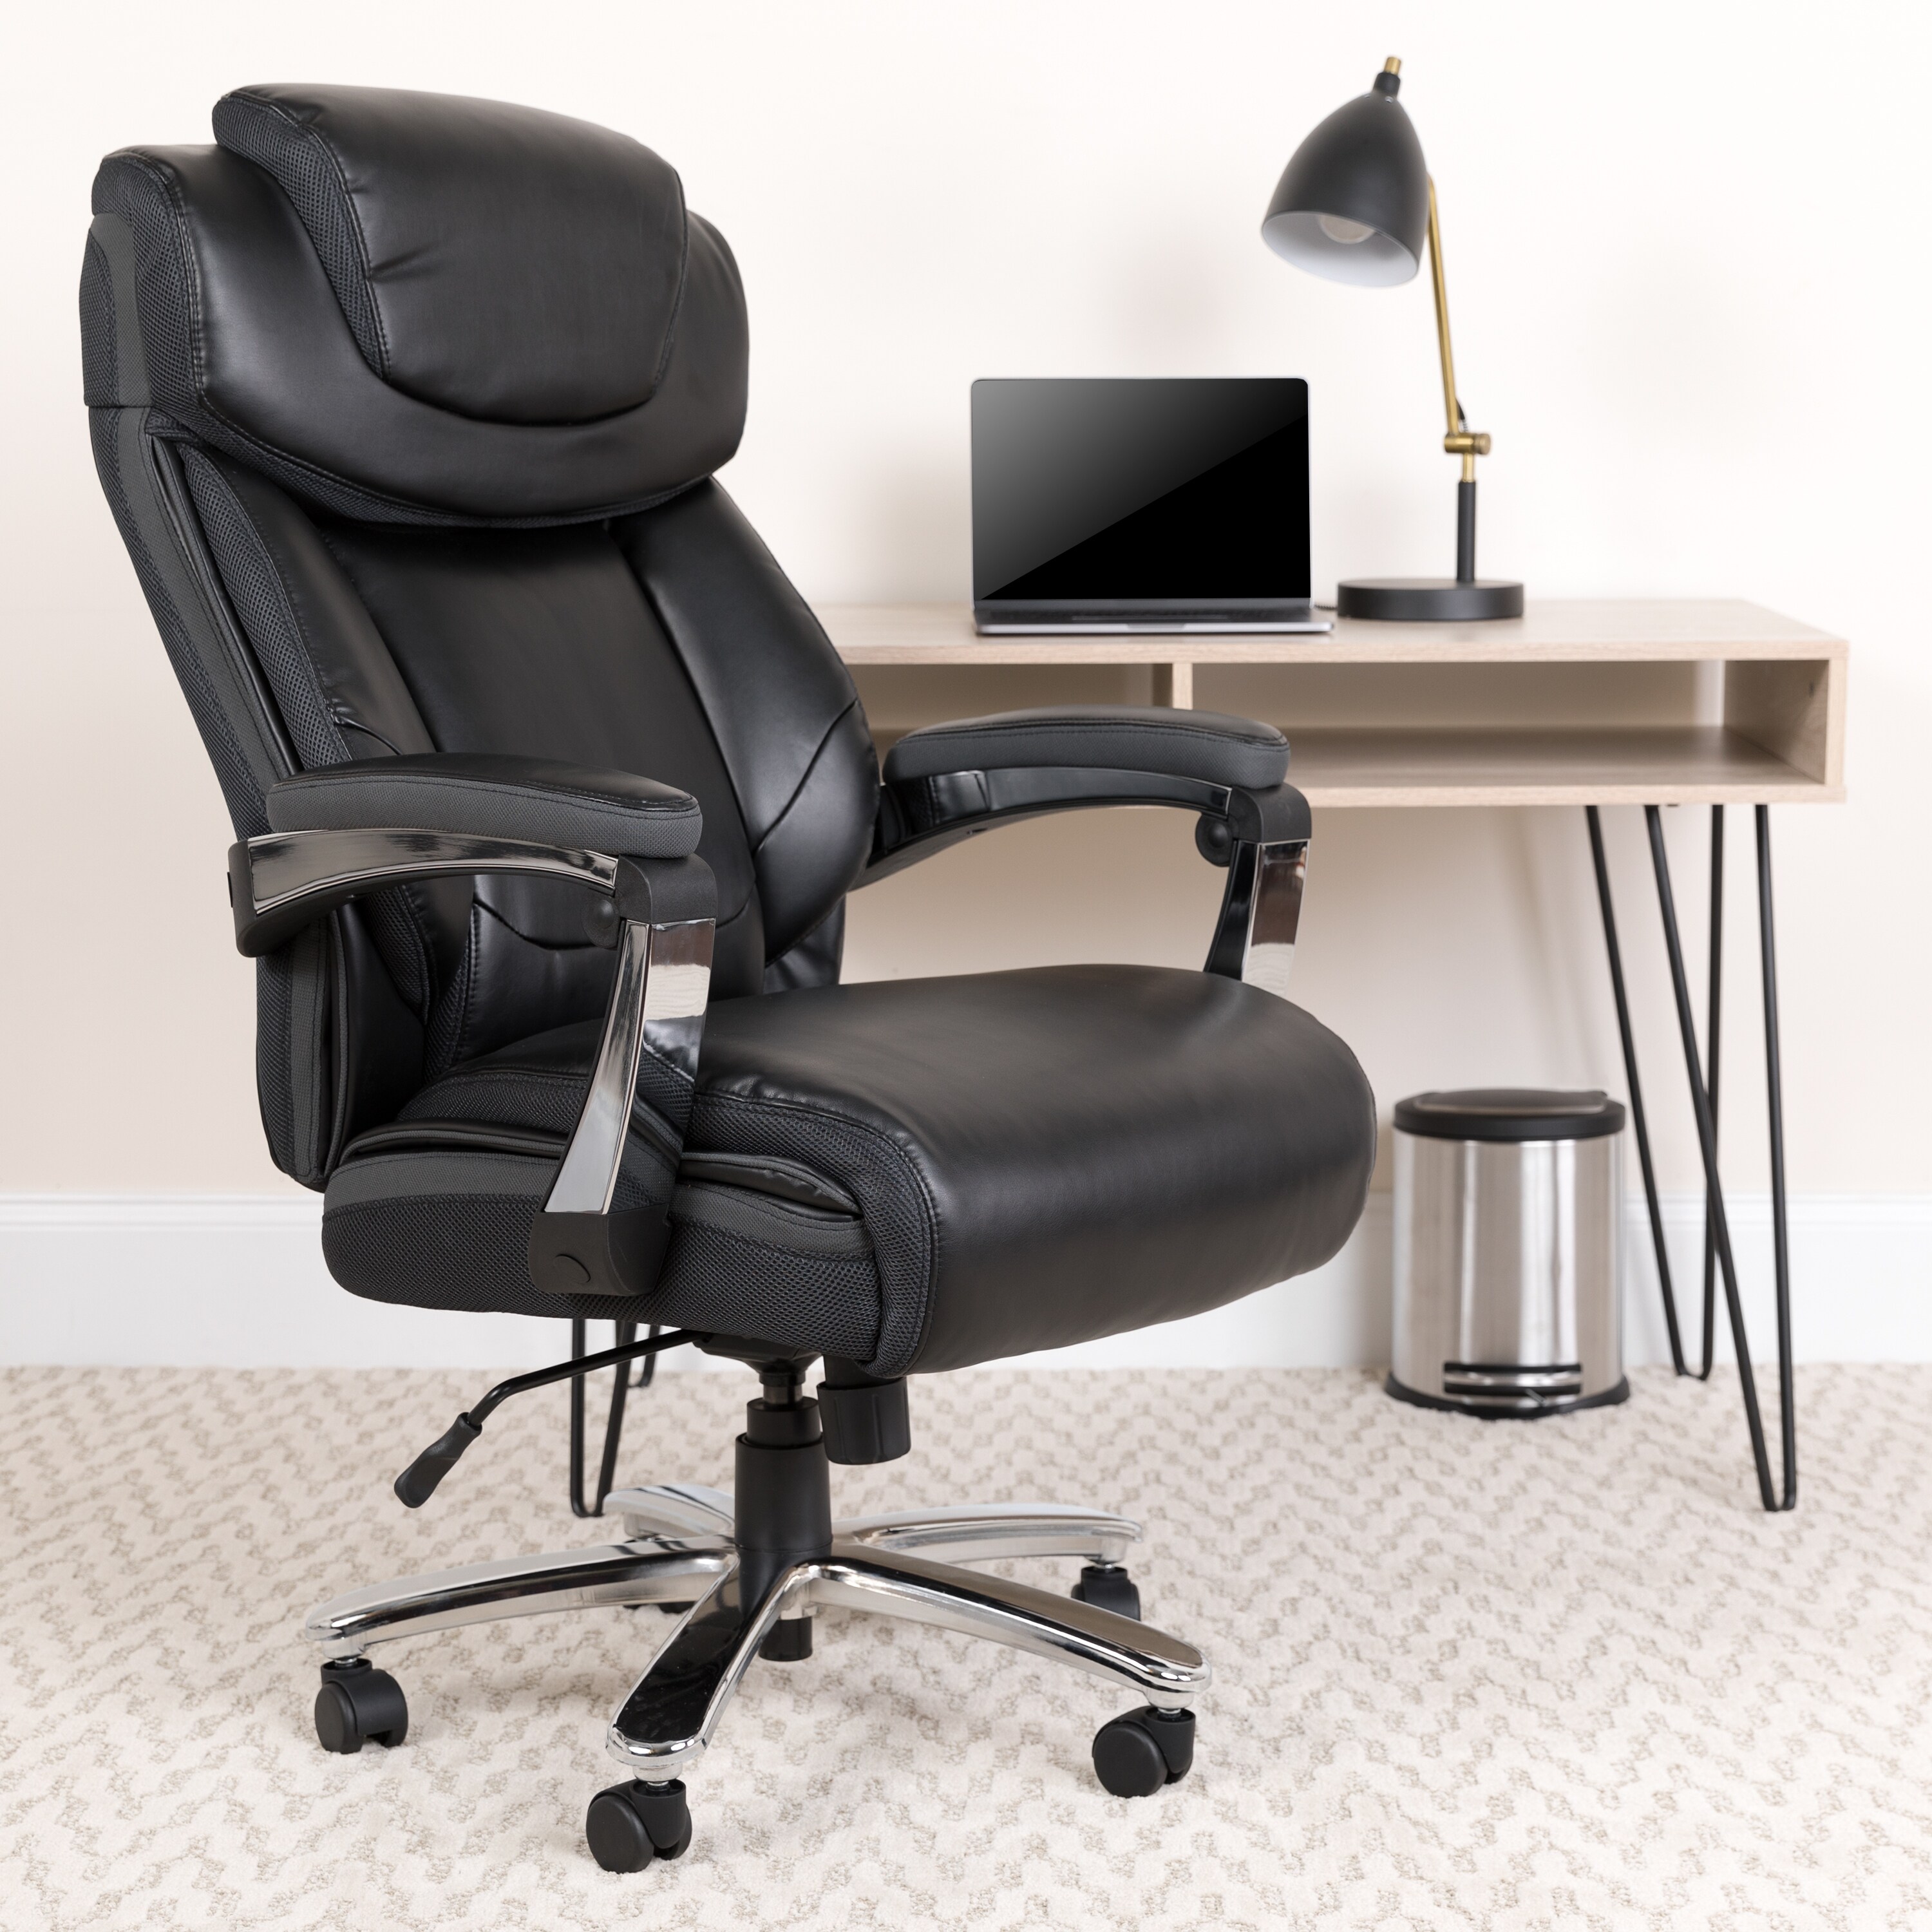 PU Leather Computer Desk Chair with Thick Padding for Comfort and Ergonomic Design for Lumbar Support LCH High Back Executive Office Chair with Adjustable Tilt Angle